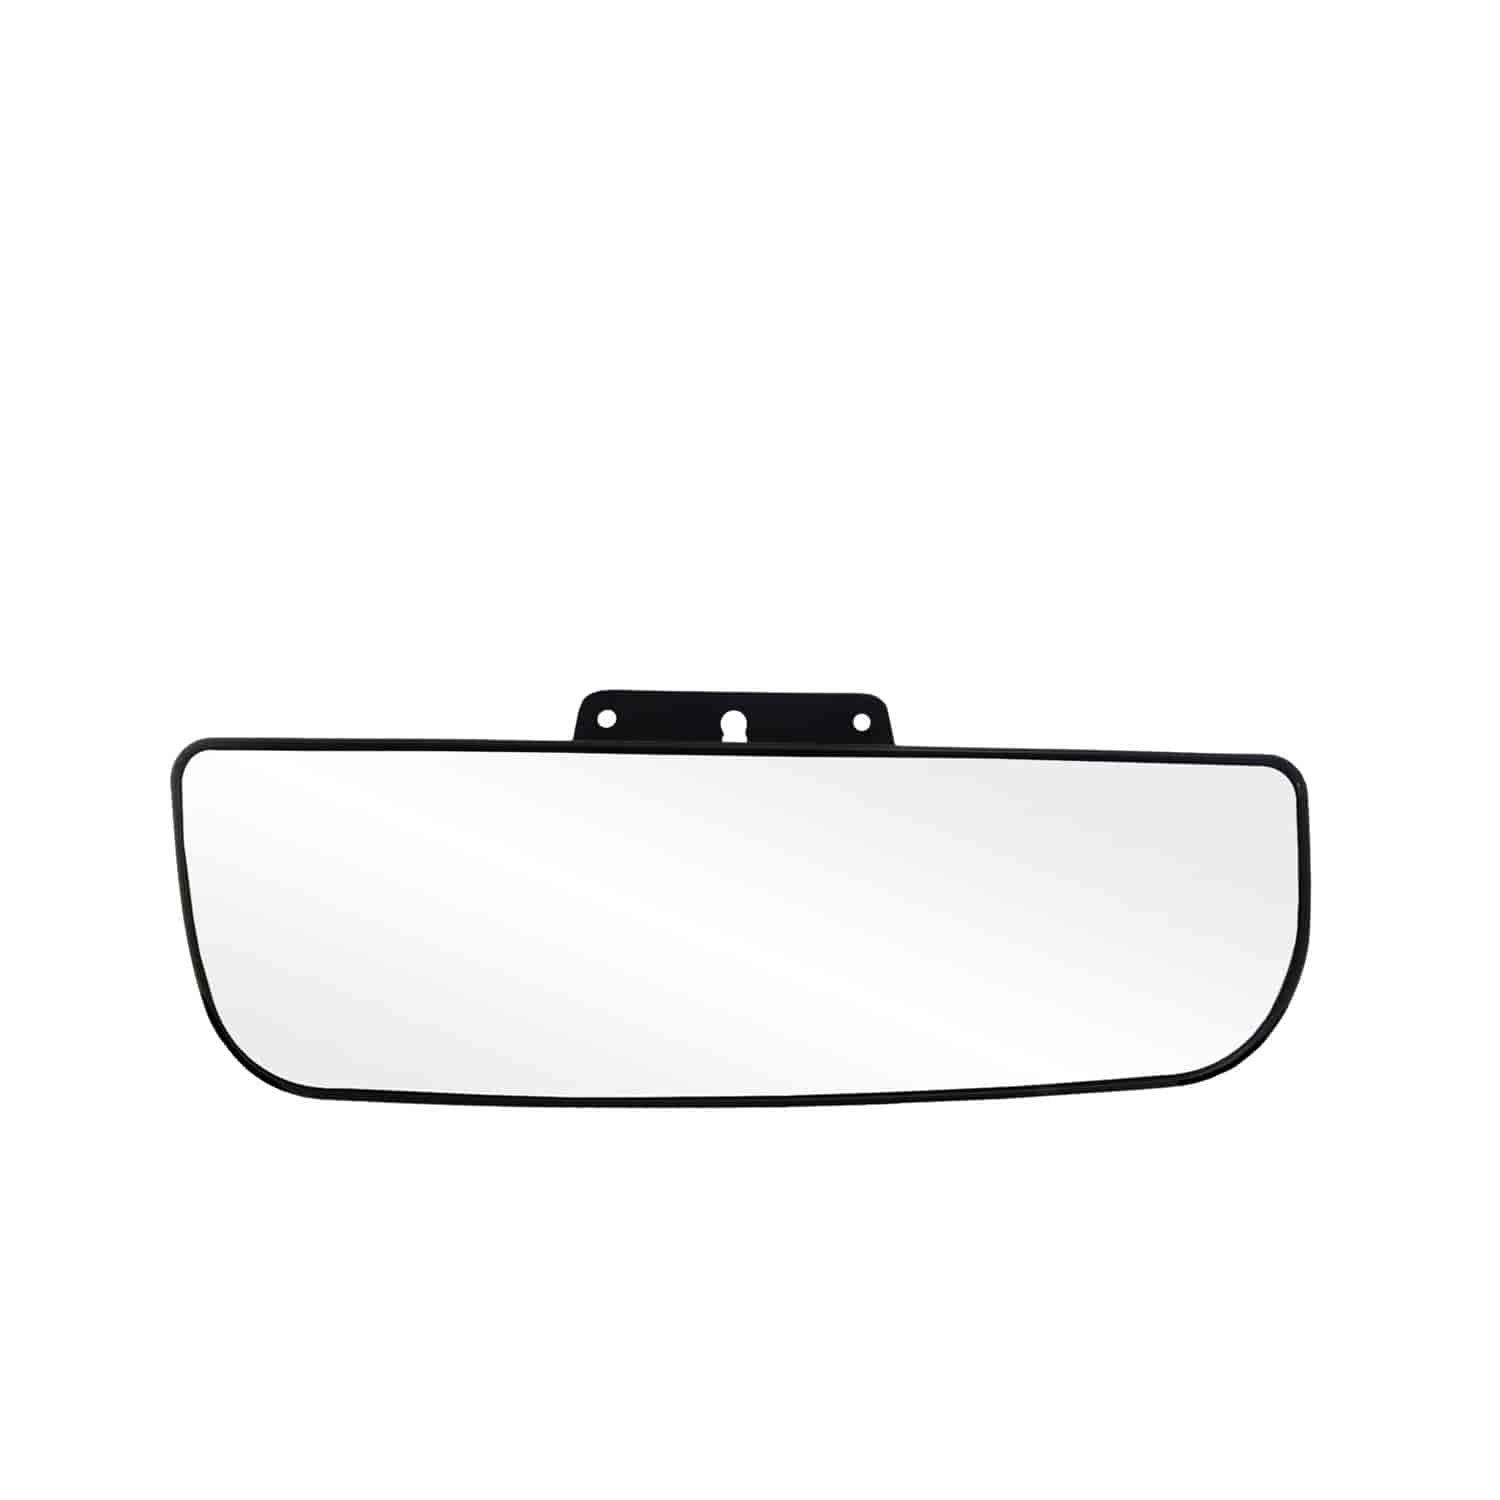 Replacement Glass Assembly for 08-14 Express Full Size